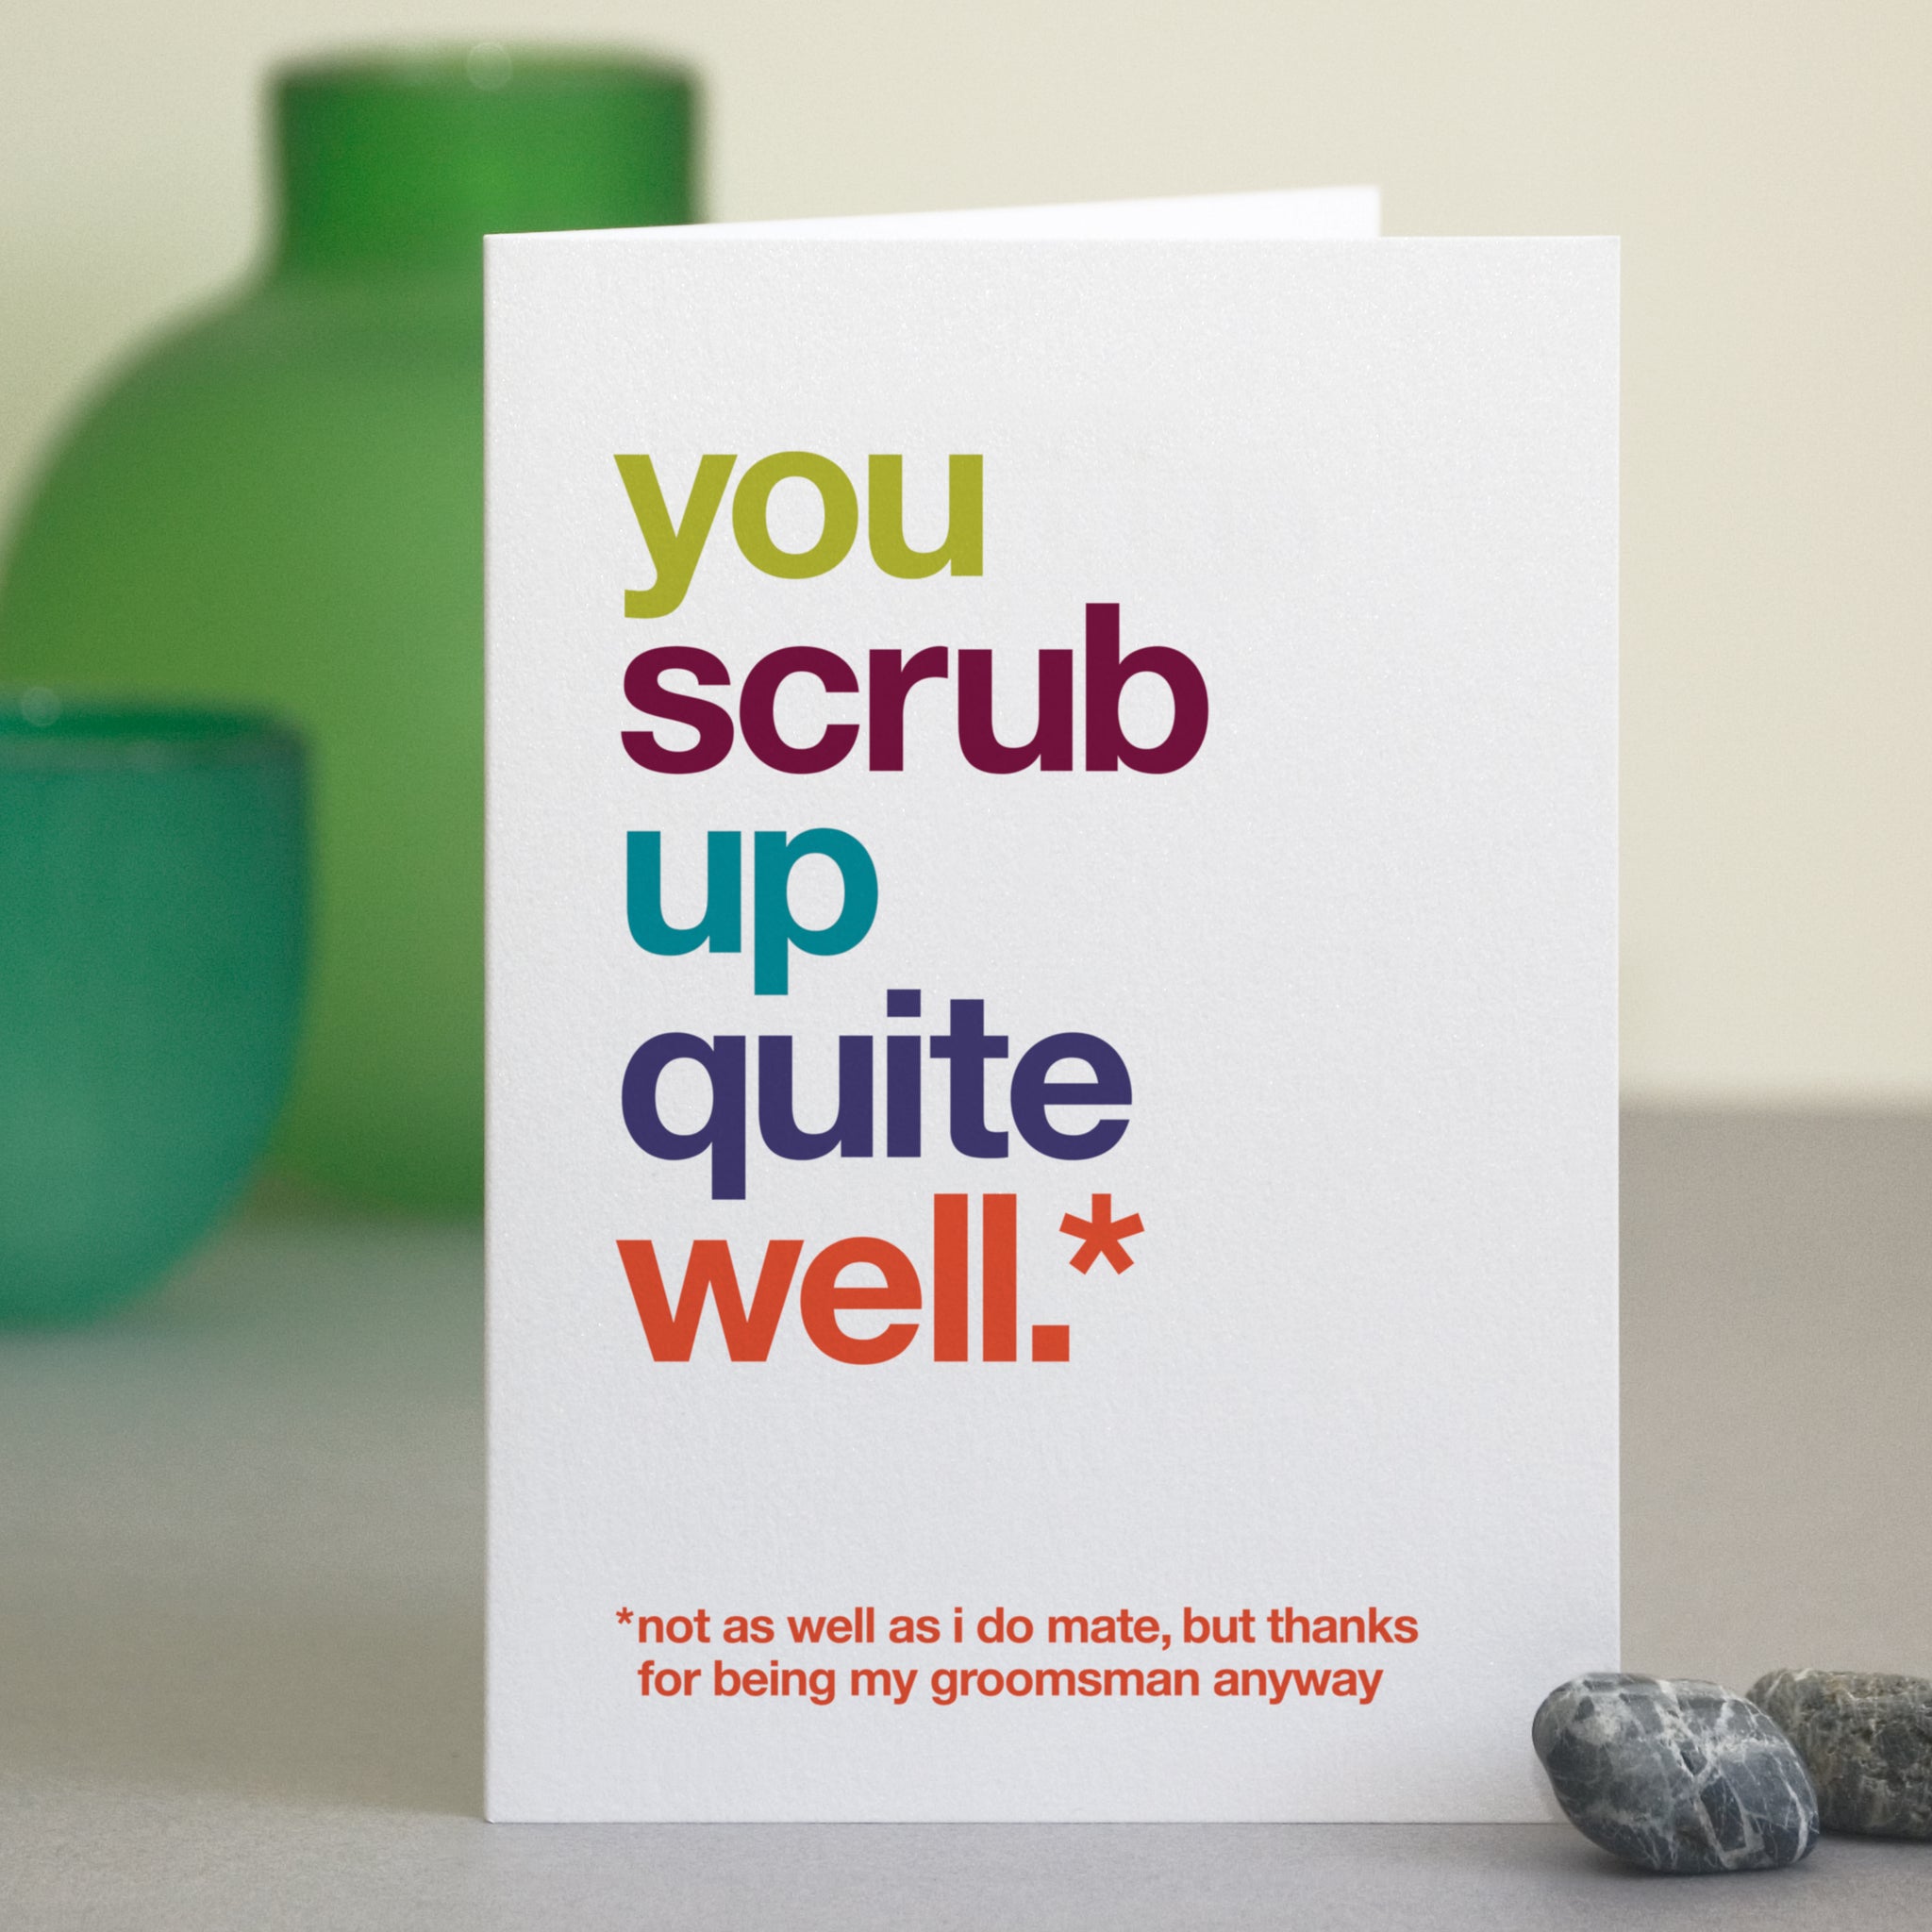 A greetings card with the text 'you scrub up quite well, not as well as i do mate, but thanks for being my groomsman anyway'.